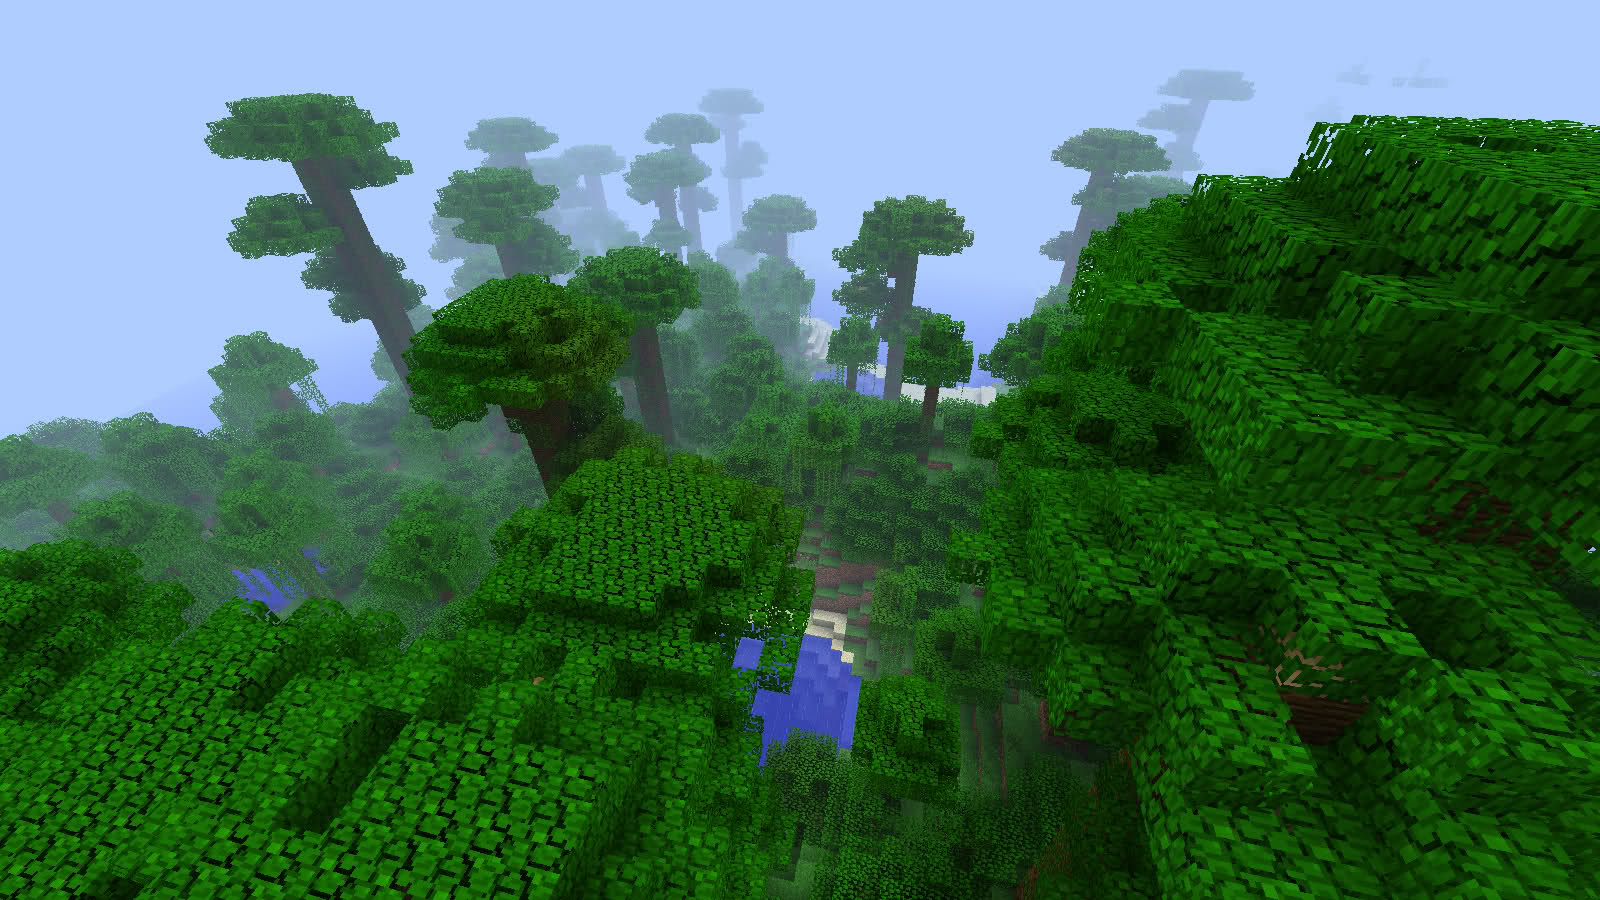 Looks Like A Jungle Biome In Minecraft 96727888 Added By Arthurriddle At Br...